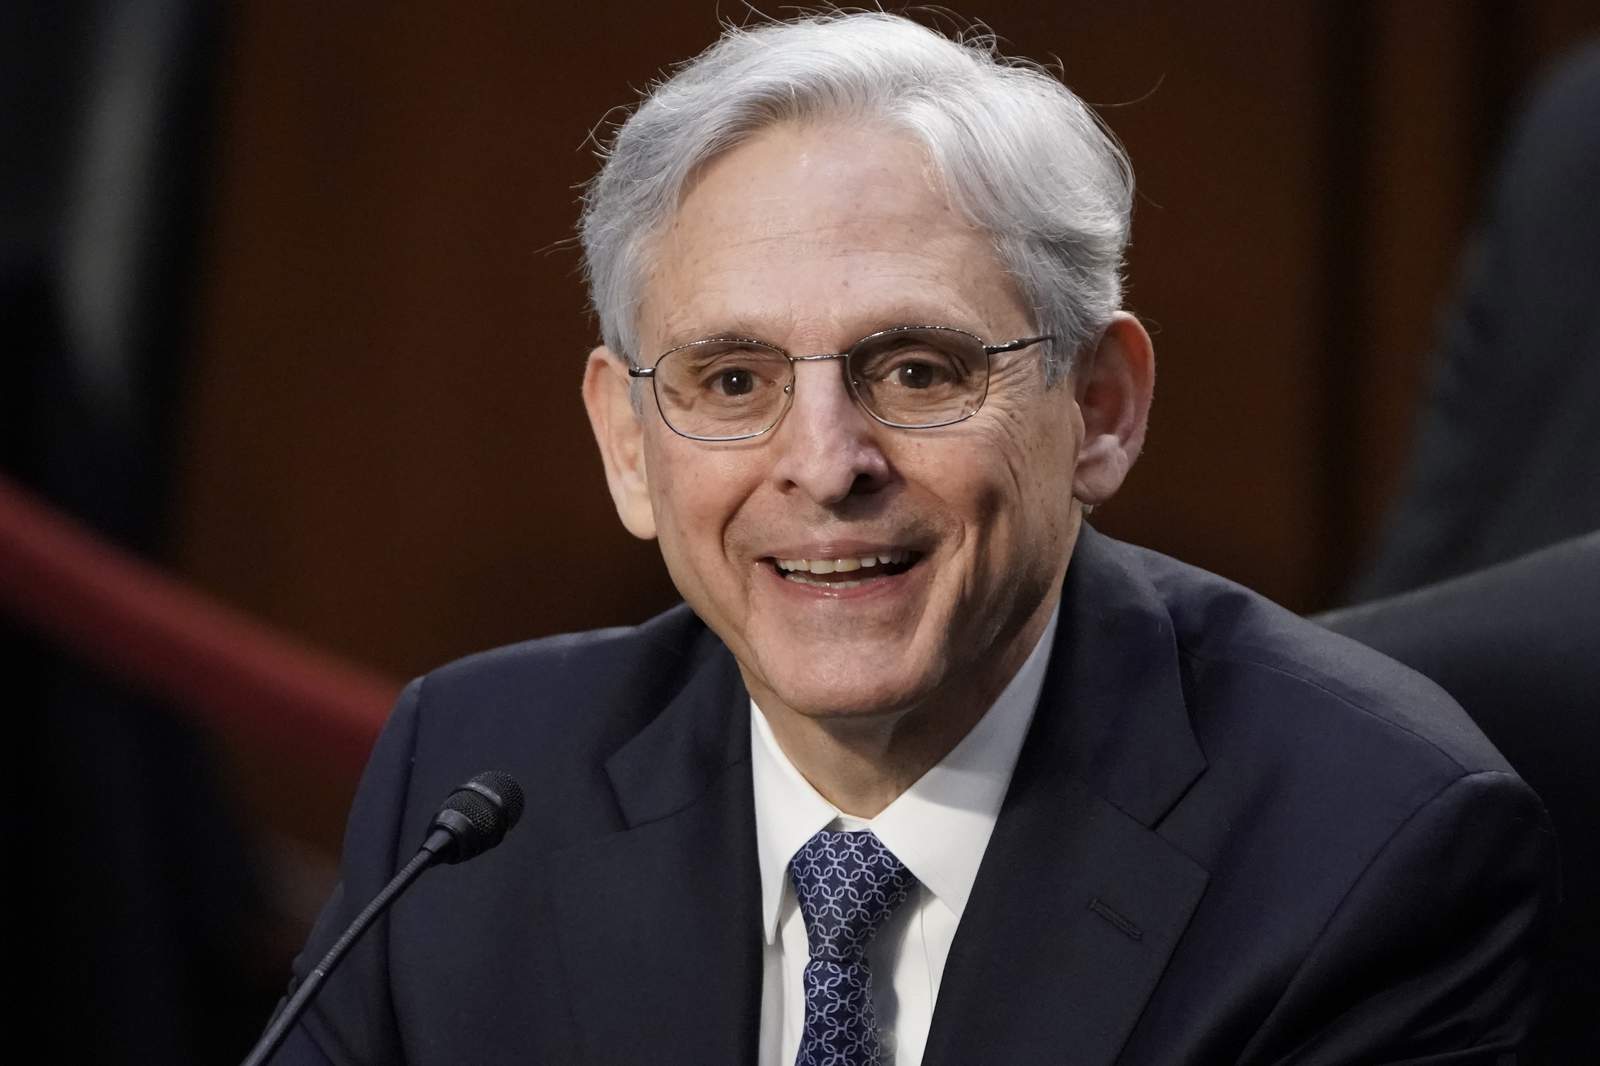 Senate panel votes to advance Garland’s nomination to be AG